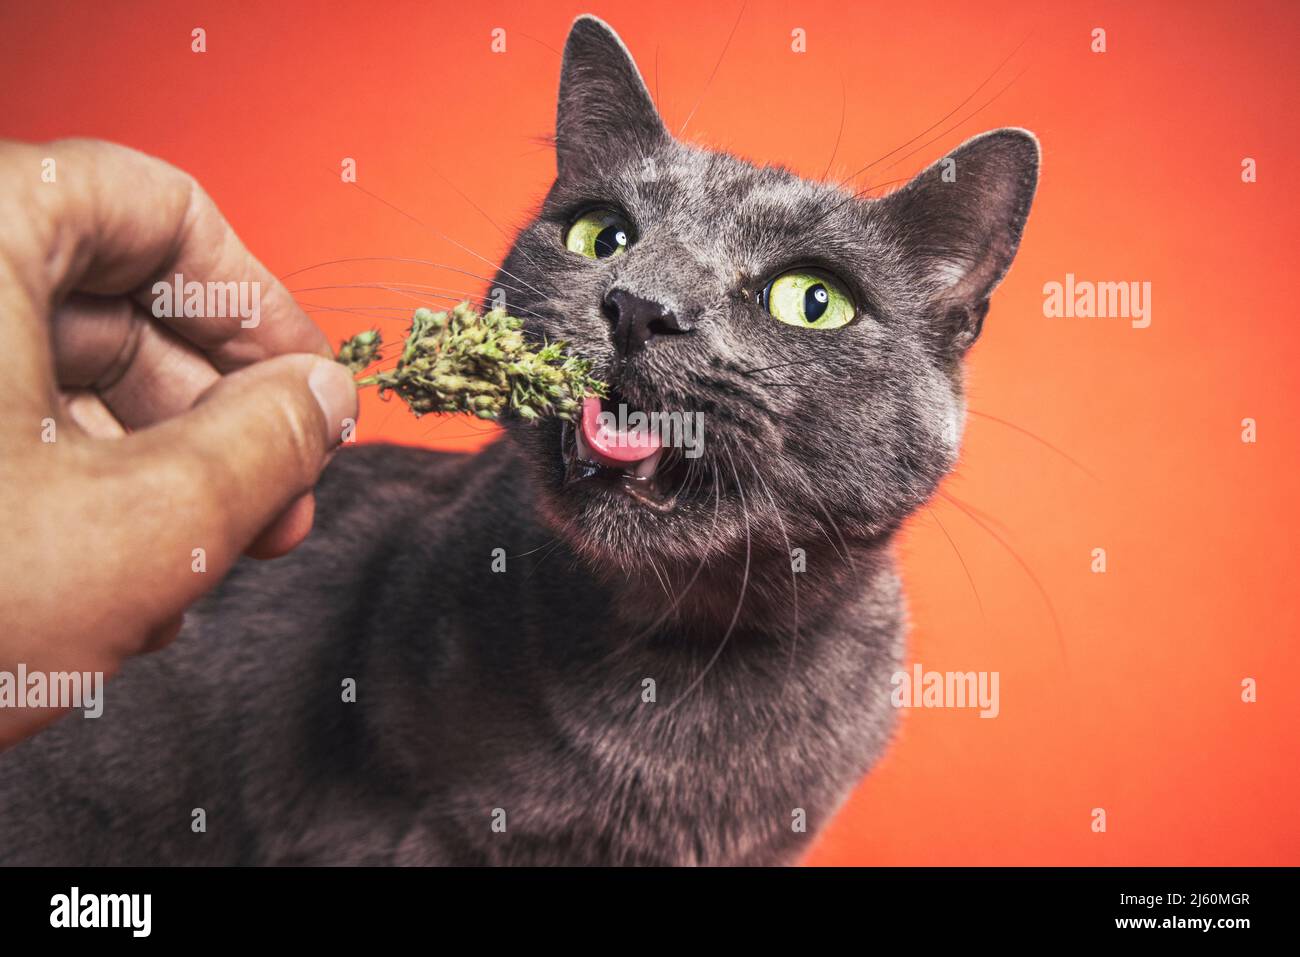 Gray domestic cat eagerly eating catnip from a person's hand while looking at camera. Stock Photo